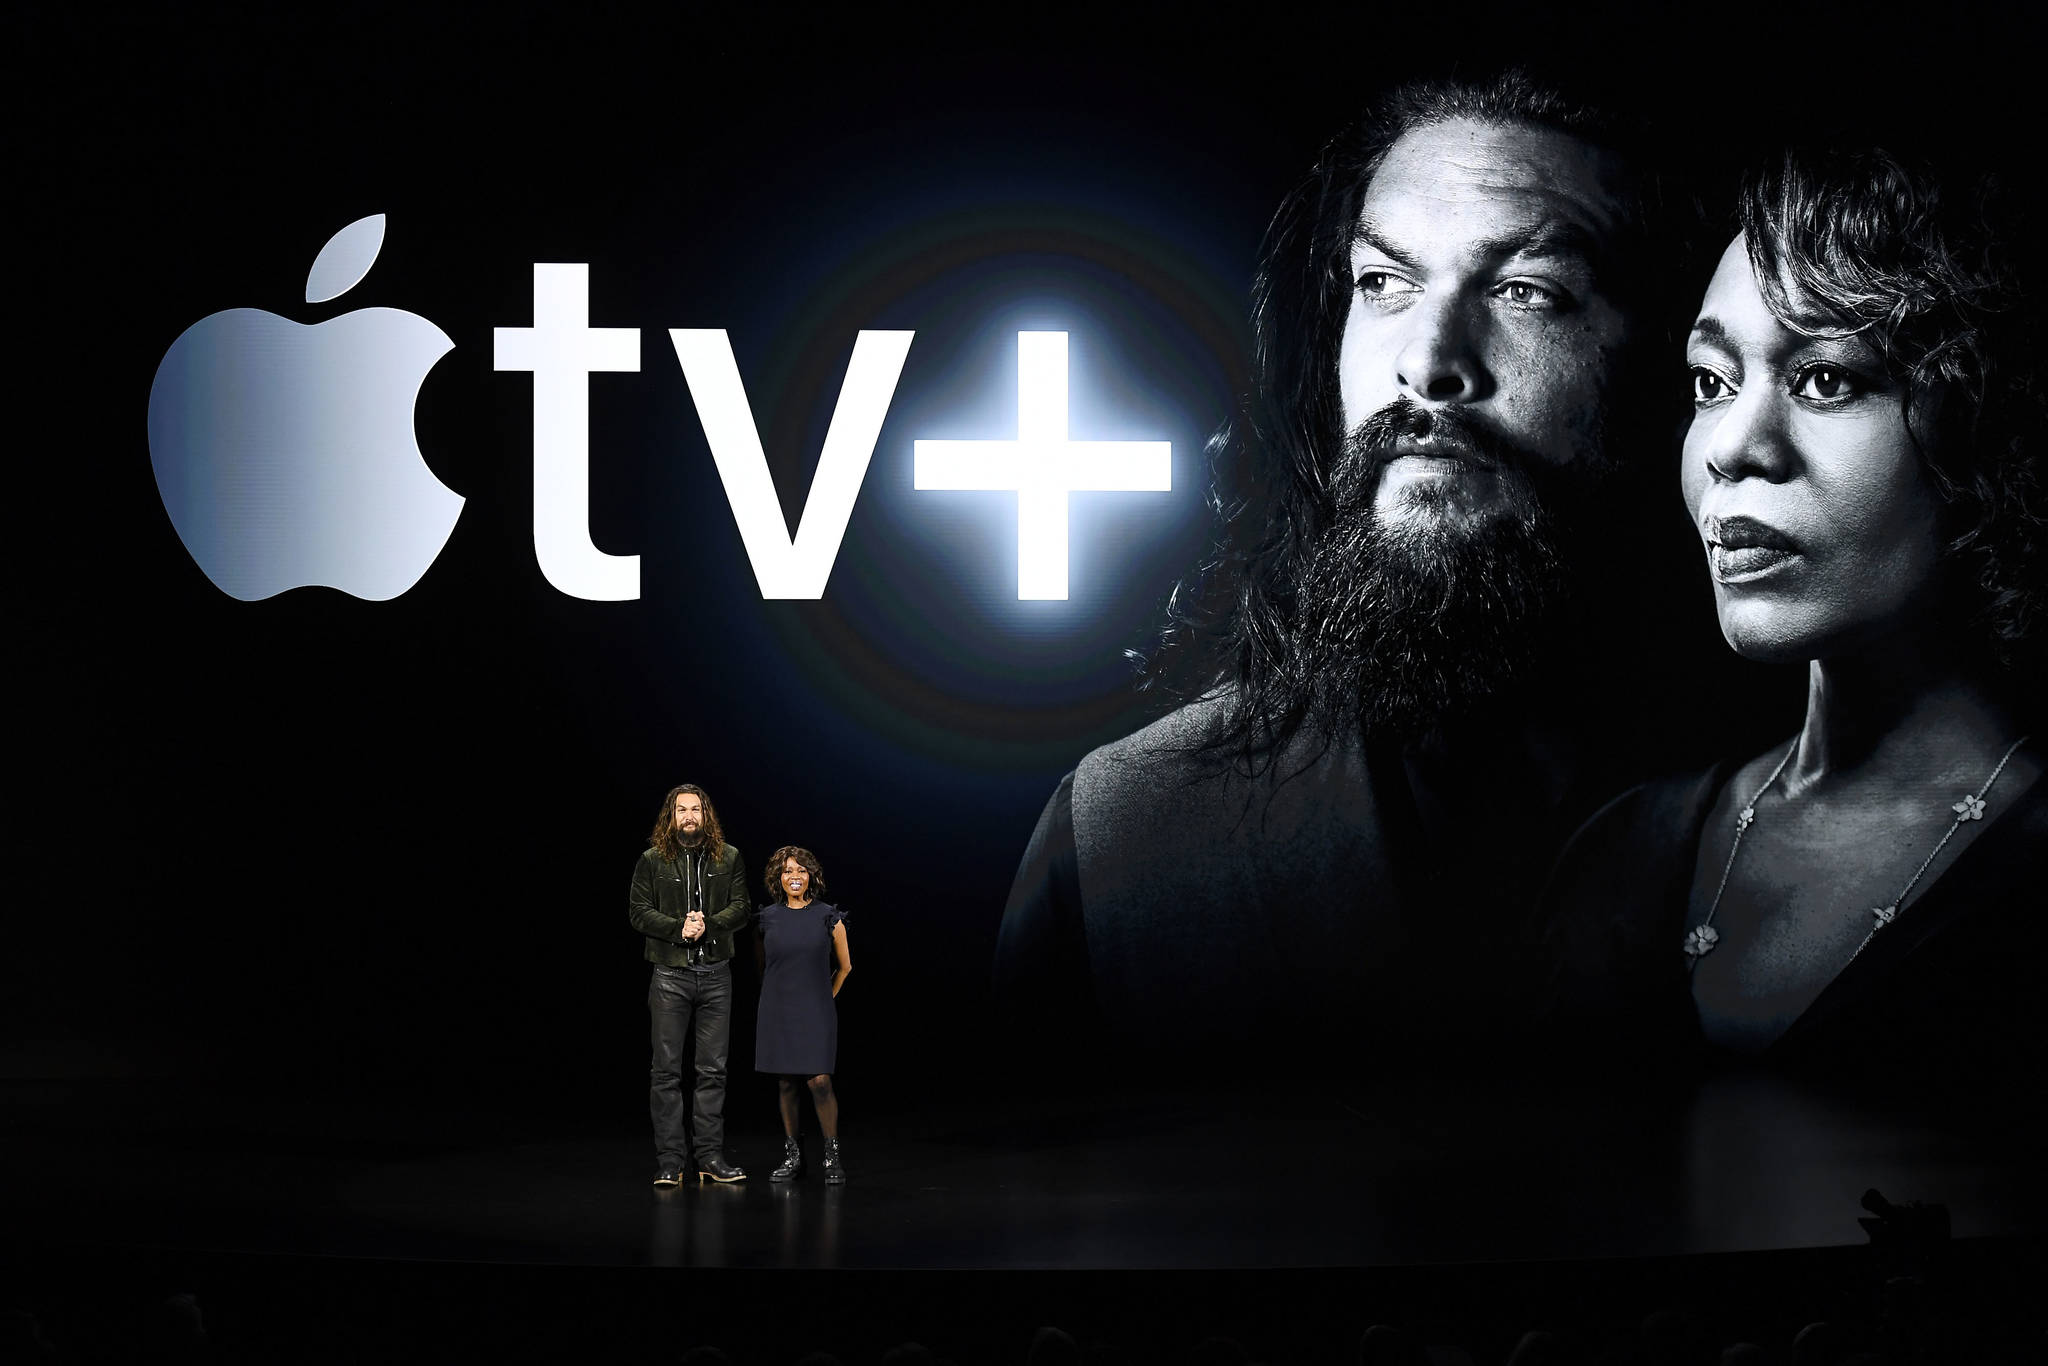 Actors Jason Momoa and Alfre Woodard, right, smile on stage during an Apple event at the Steve Jobs Theater in Cupertino, Calif., on Monday. MUST CREDIT: Bloomberg photo by David Paul Morris